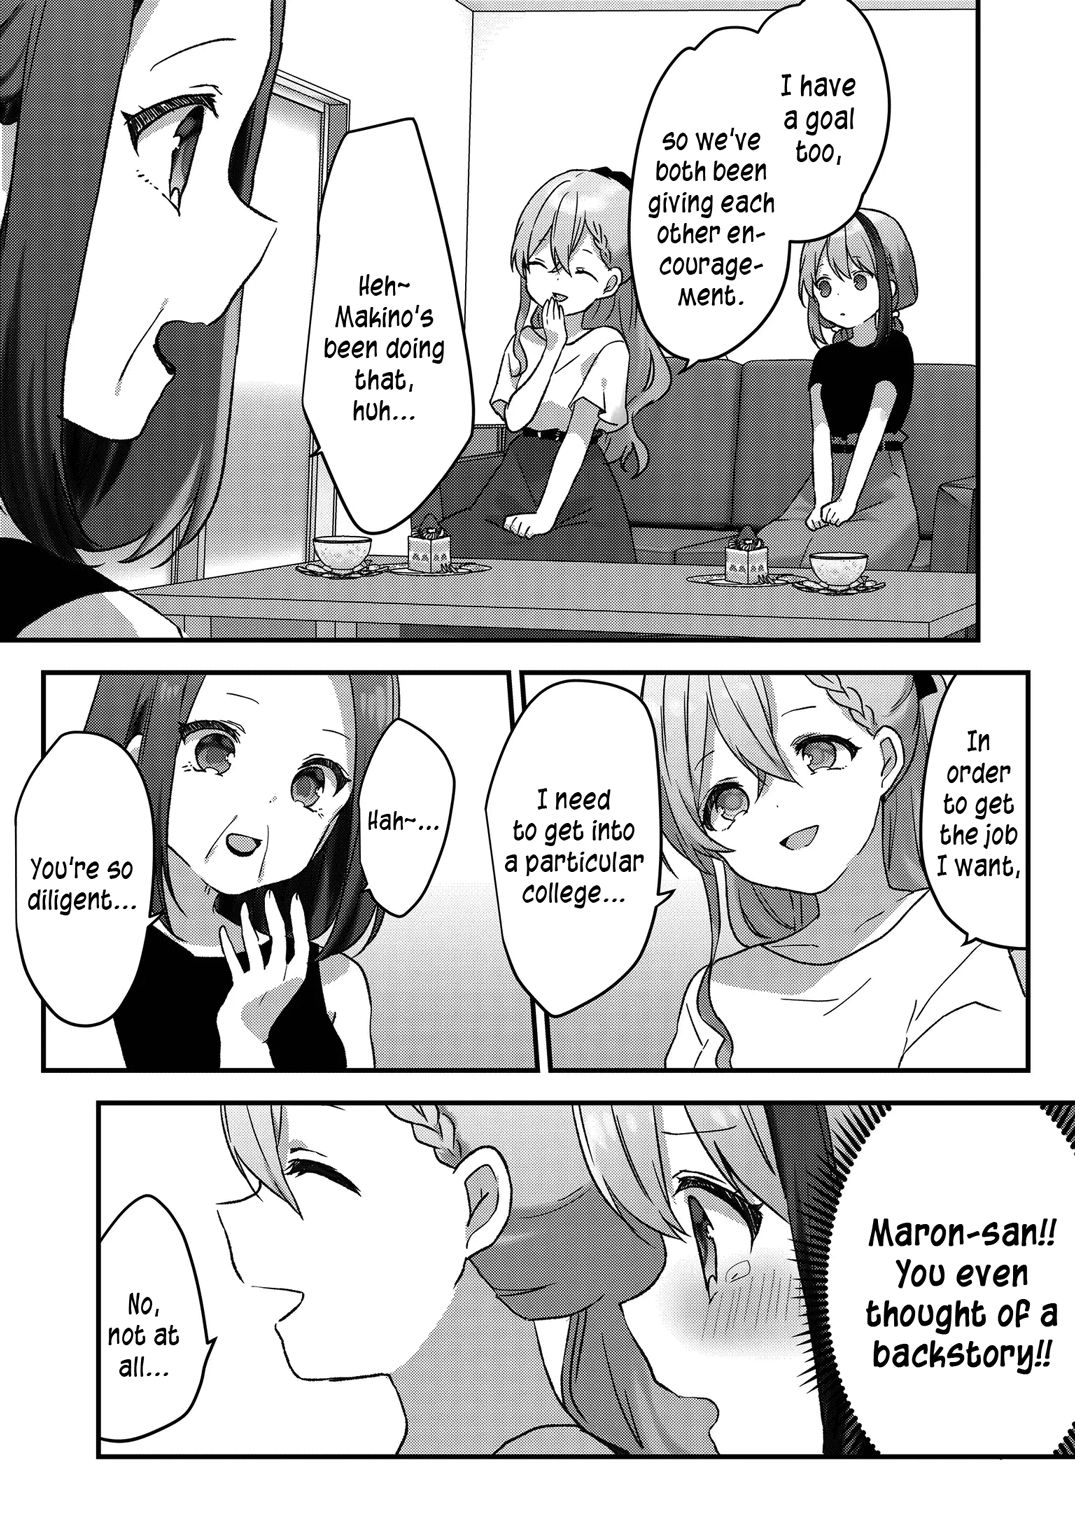 Failed University Exams I am Trash and Life is Hard, so I Tried Calling an Onee-san at Night - chapter 14 - #5